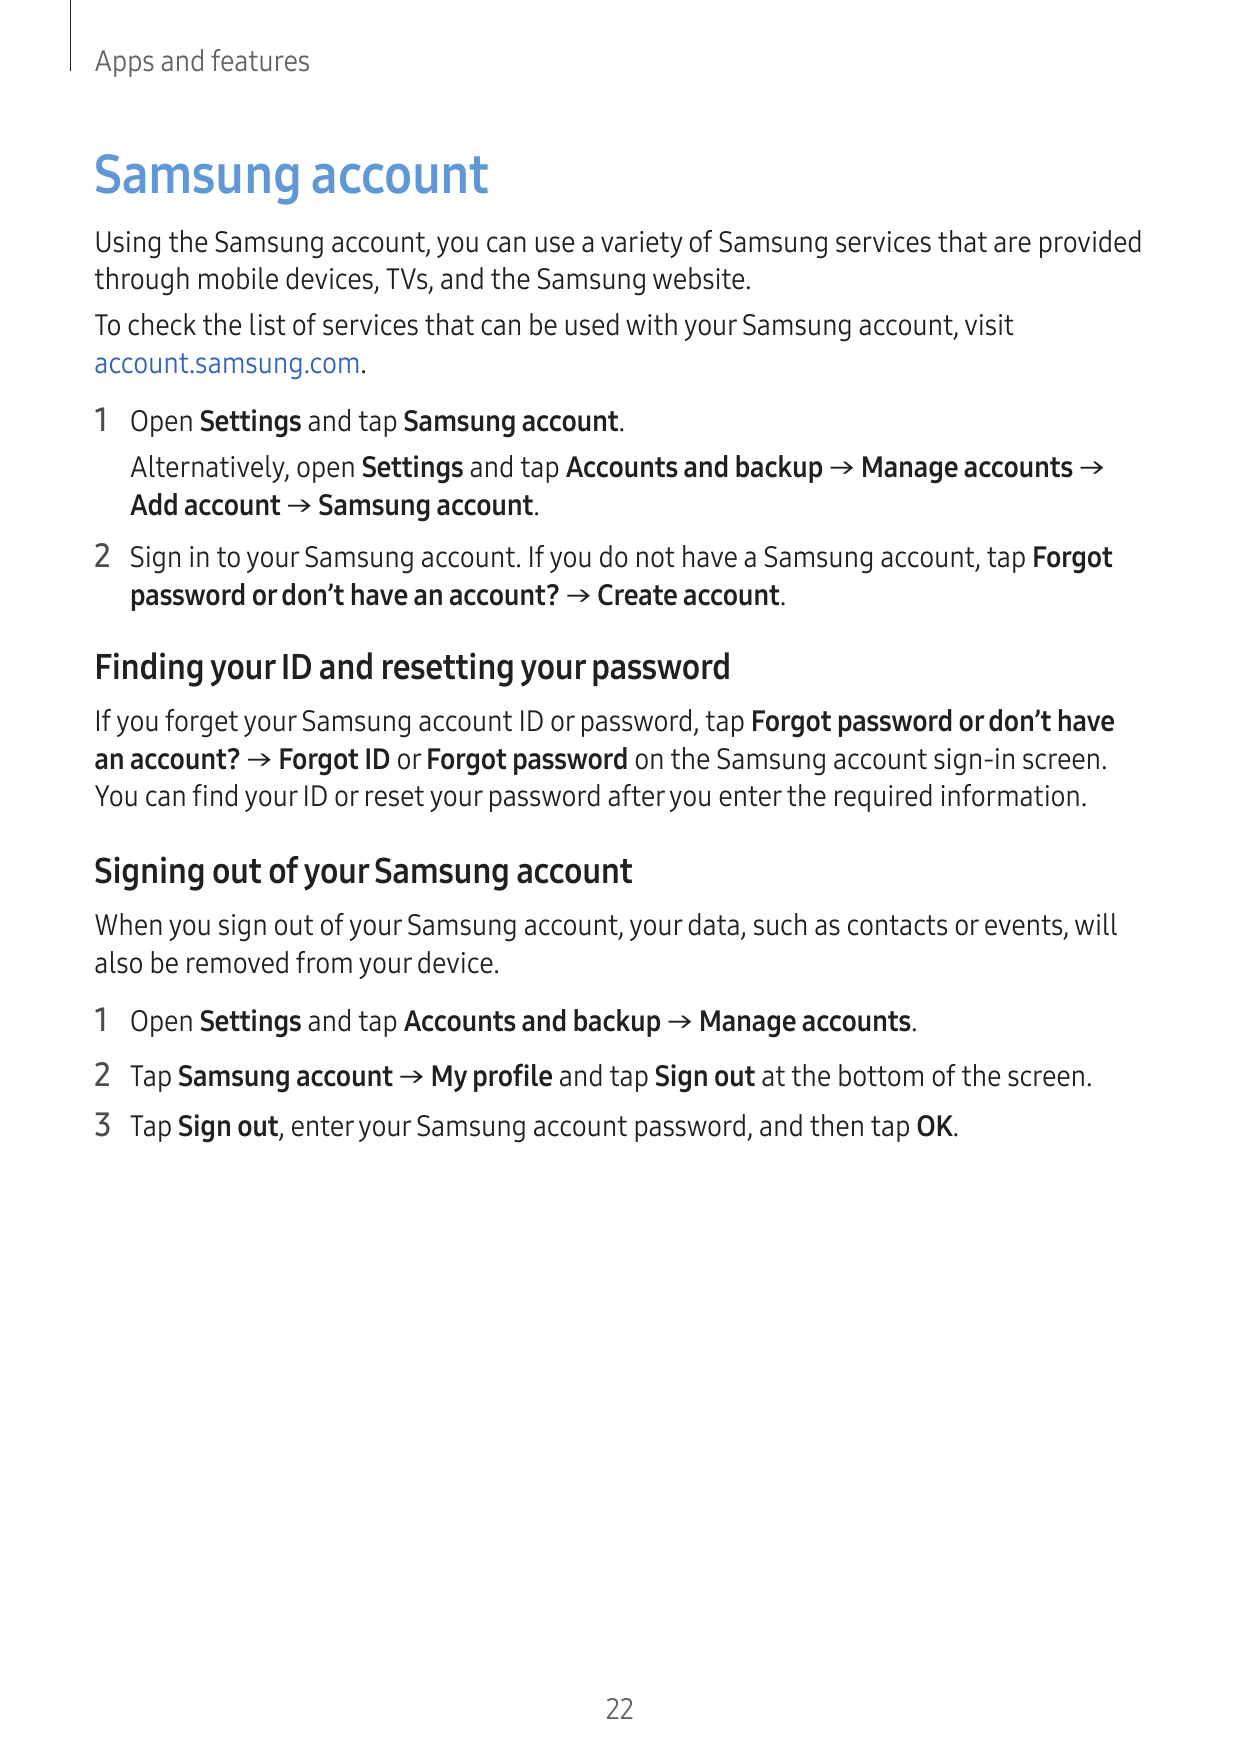 Apps and featuresSamsung accountUsing the Samsung account, you can use a variety of Samsung services that are providedthrough mo